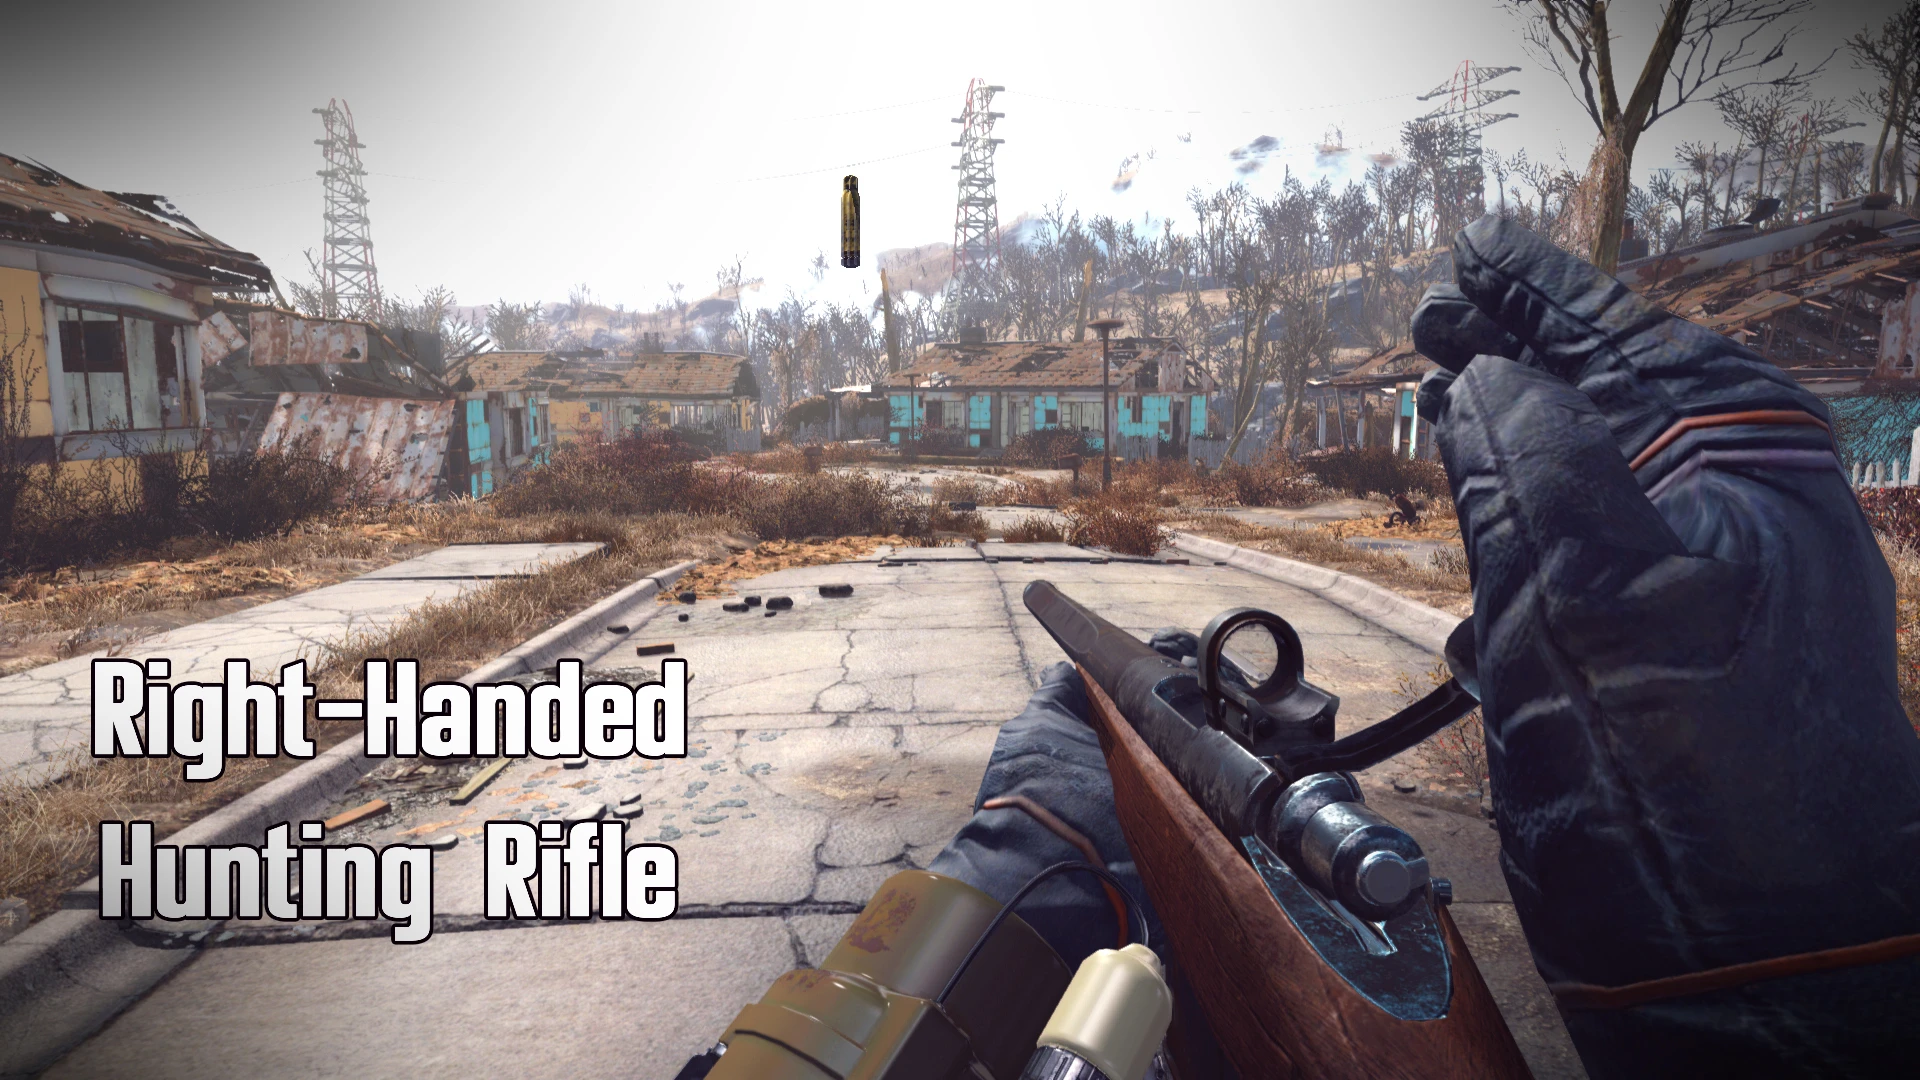 Fallout 4 hunting rifle right handed фото 1